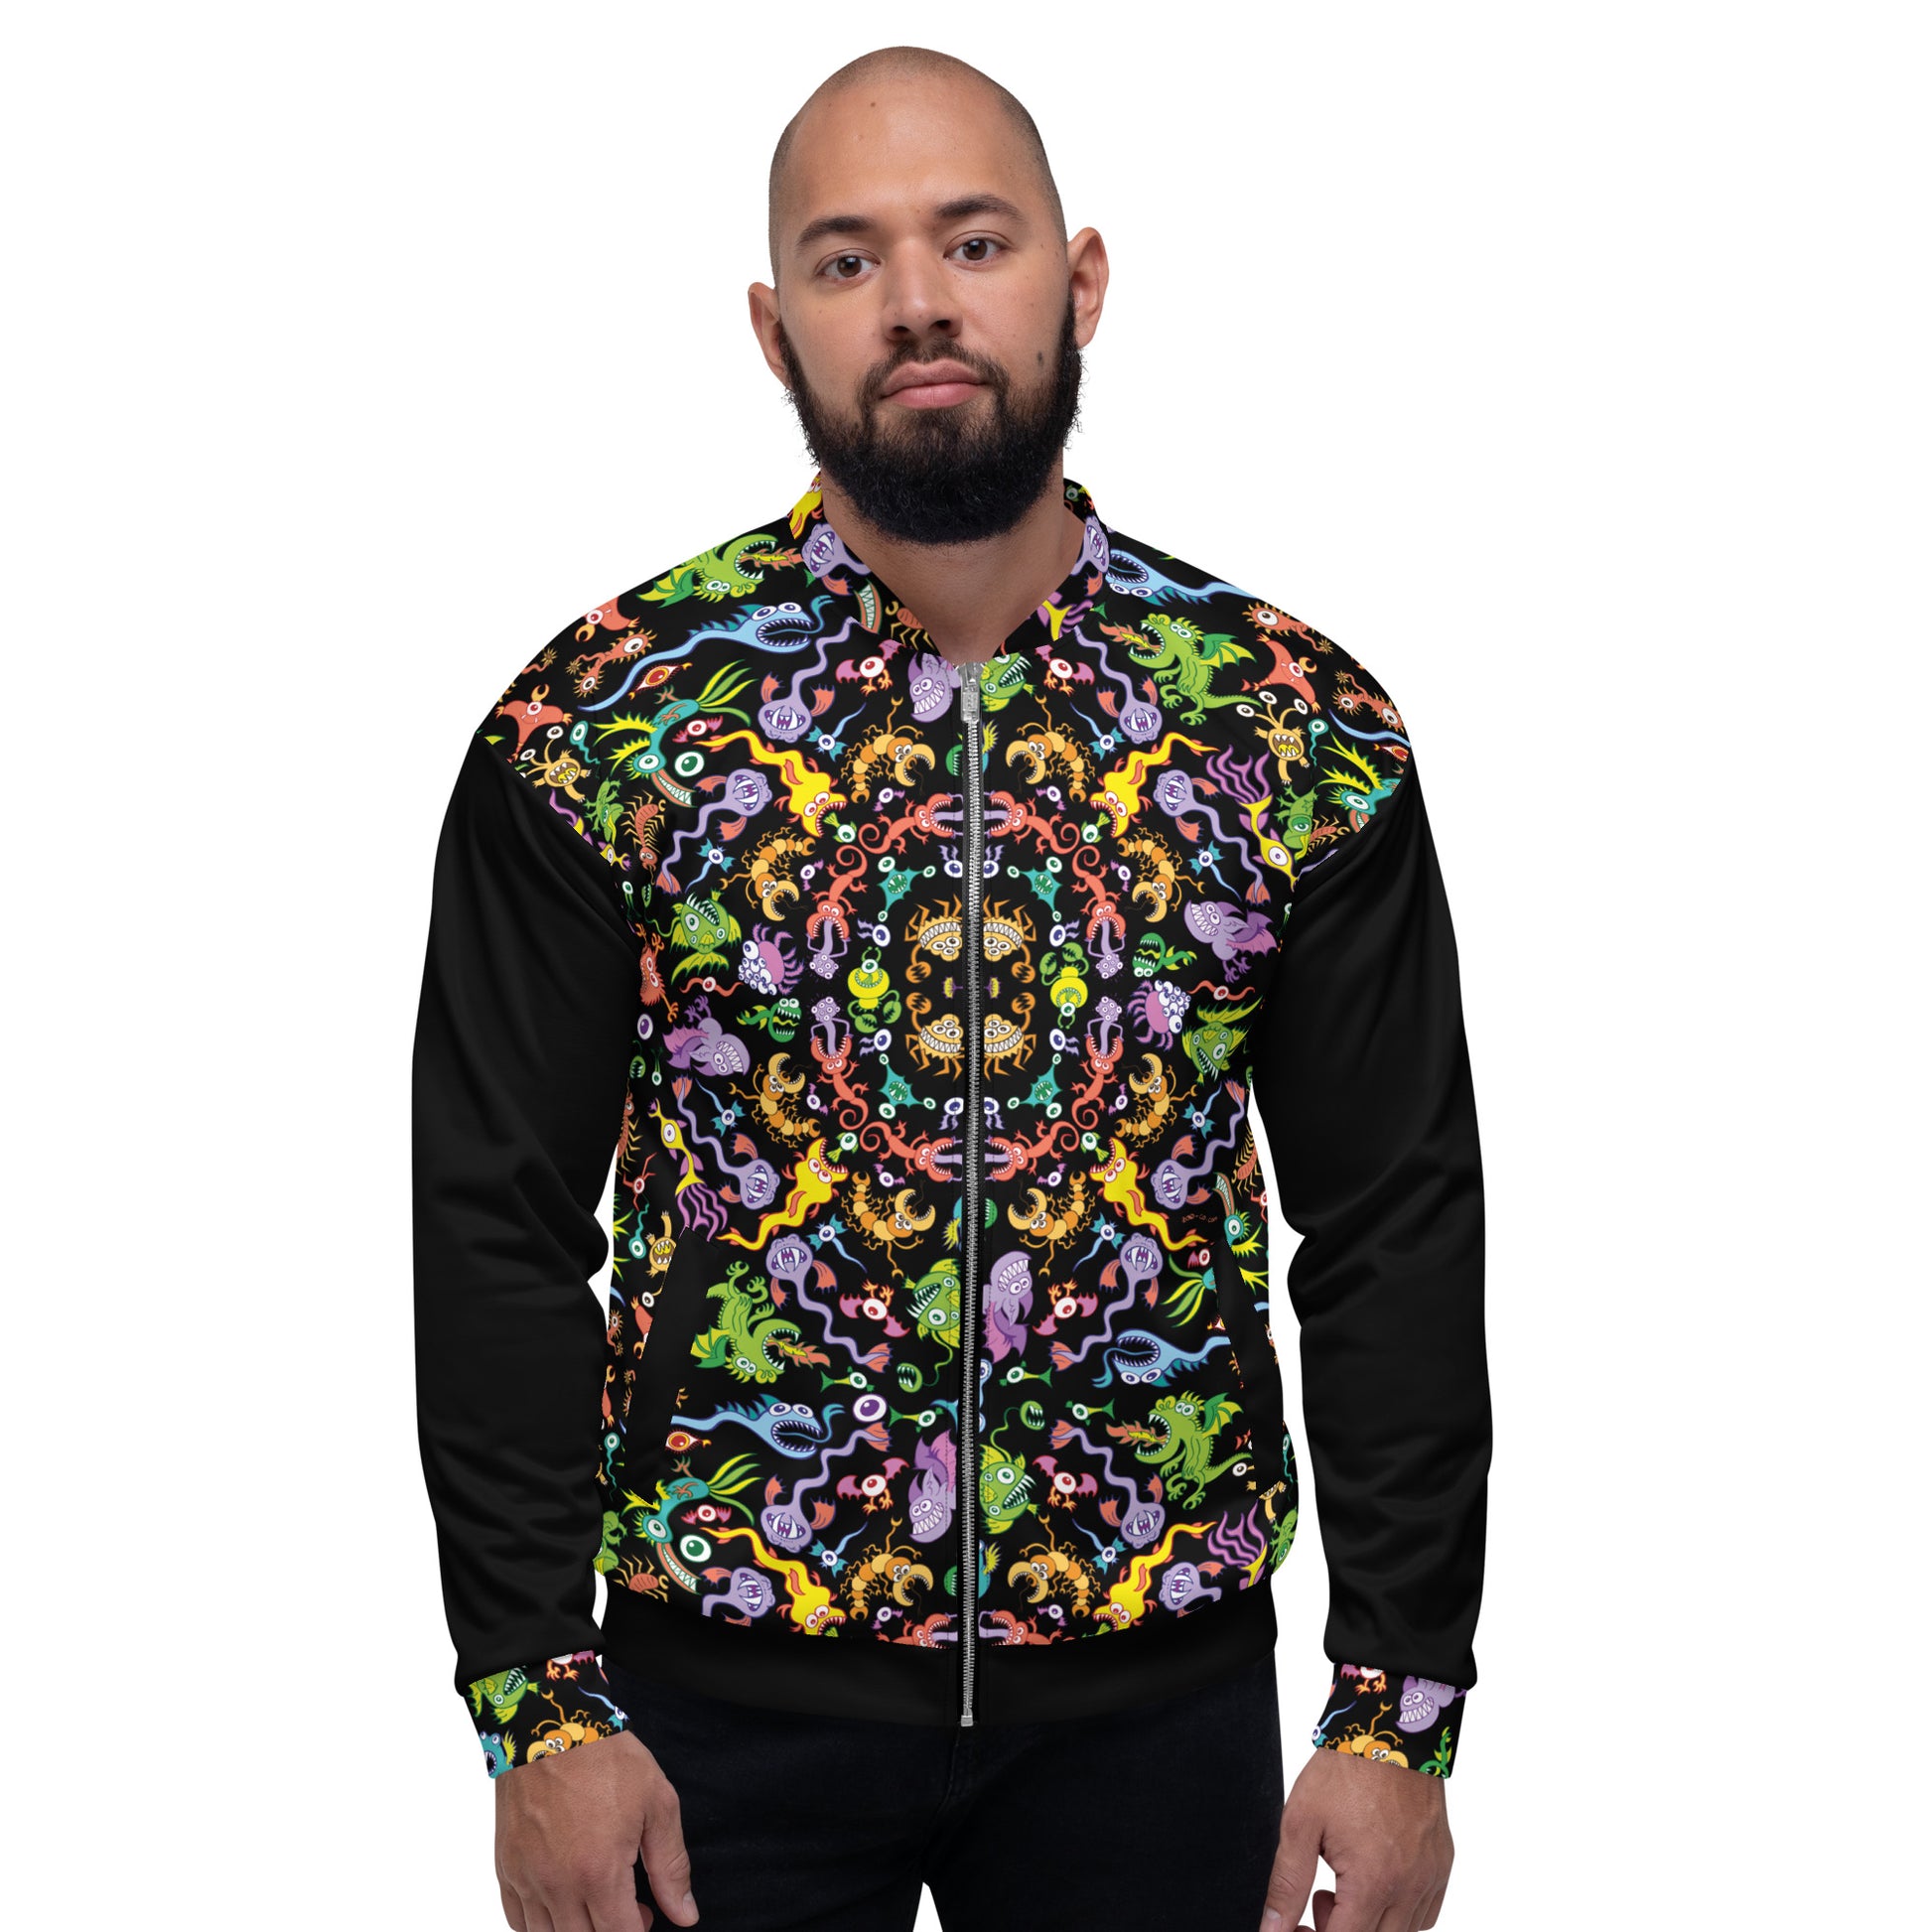 Man wearing a Unisex Bomber Jacket All-over printed with Ocean critters pattern mandala